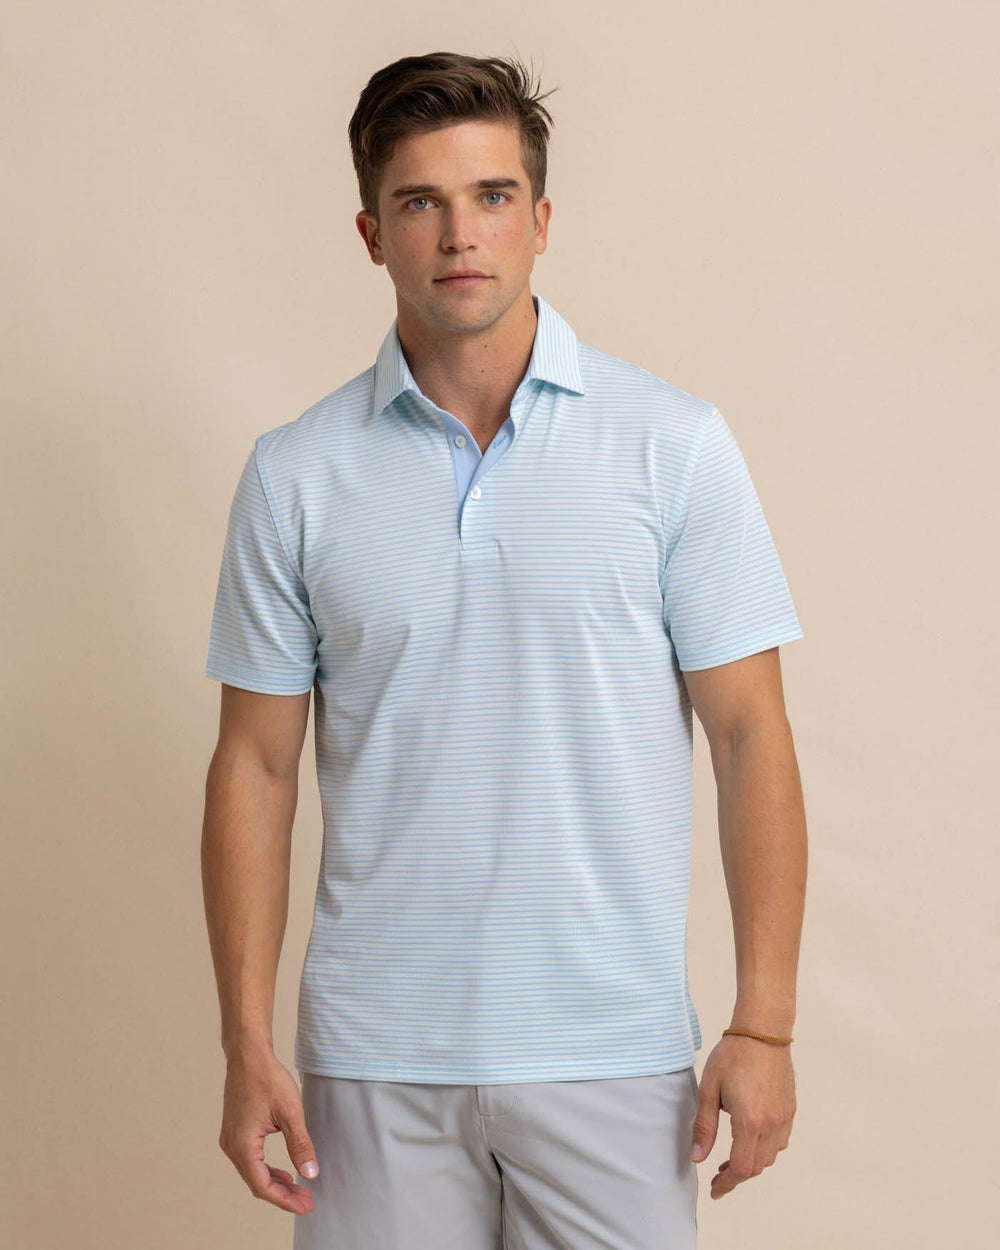 The front view of the Southern Tide Driver Verdae Stripe Polo by Southern Tide - Seacrest Green